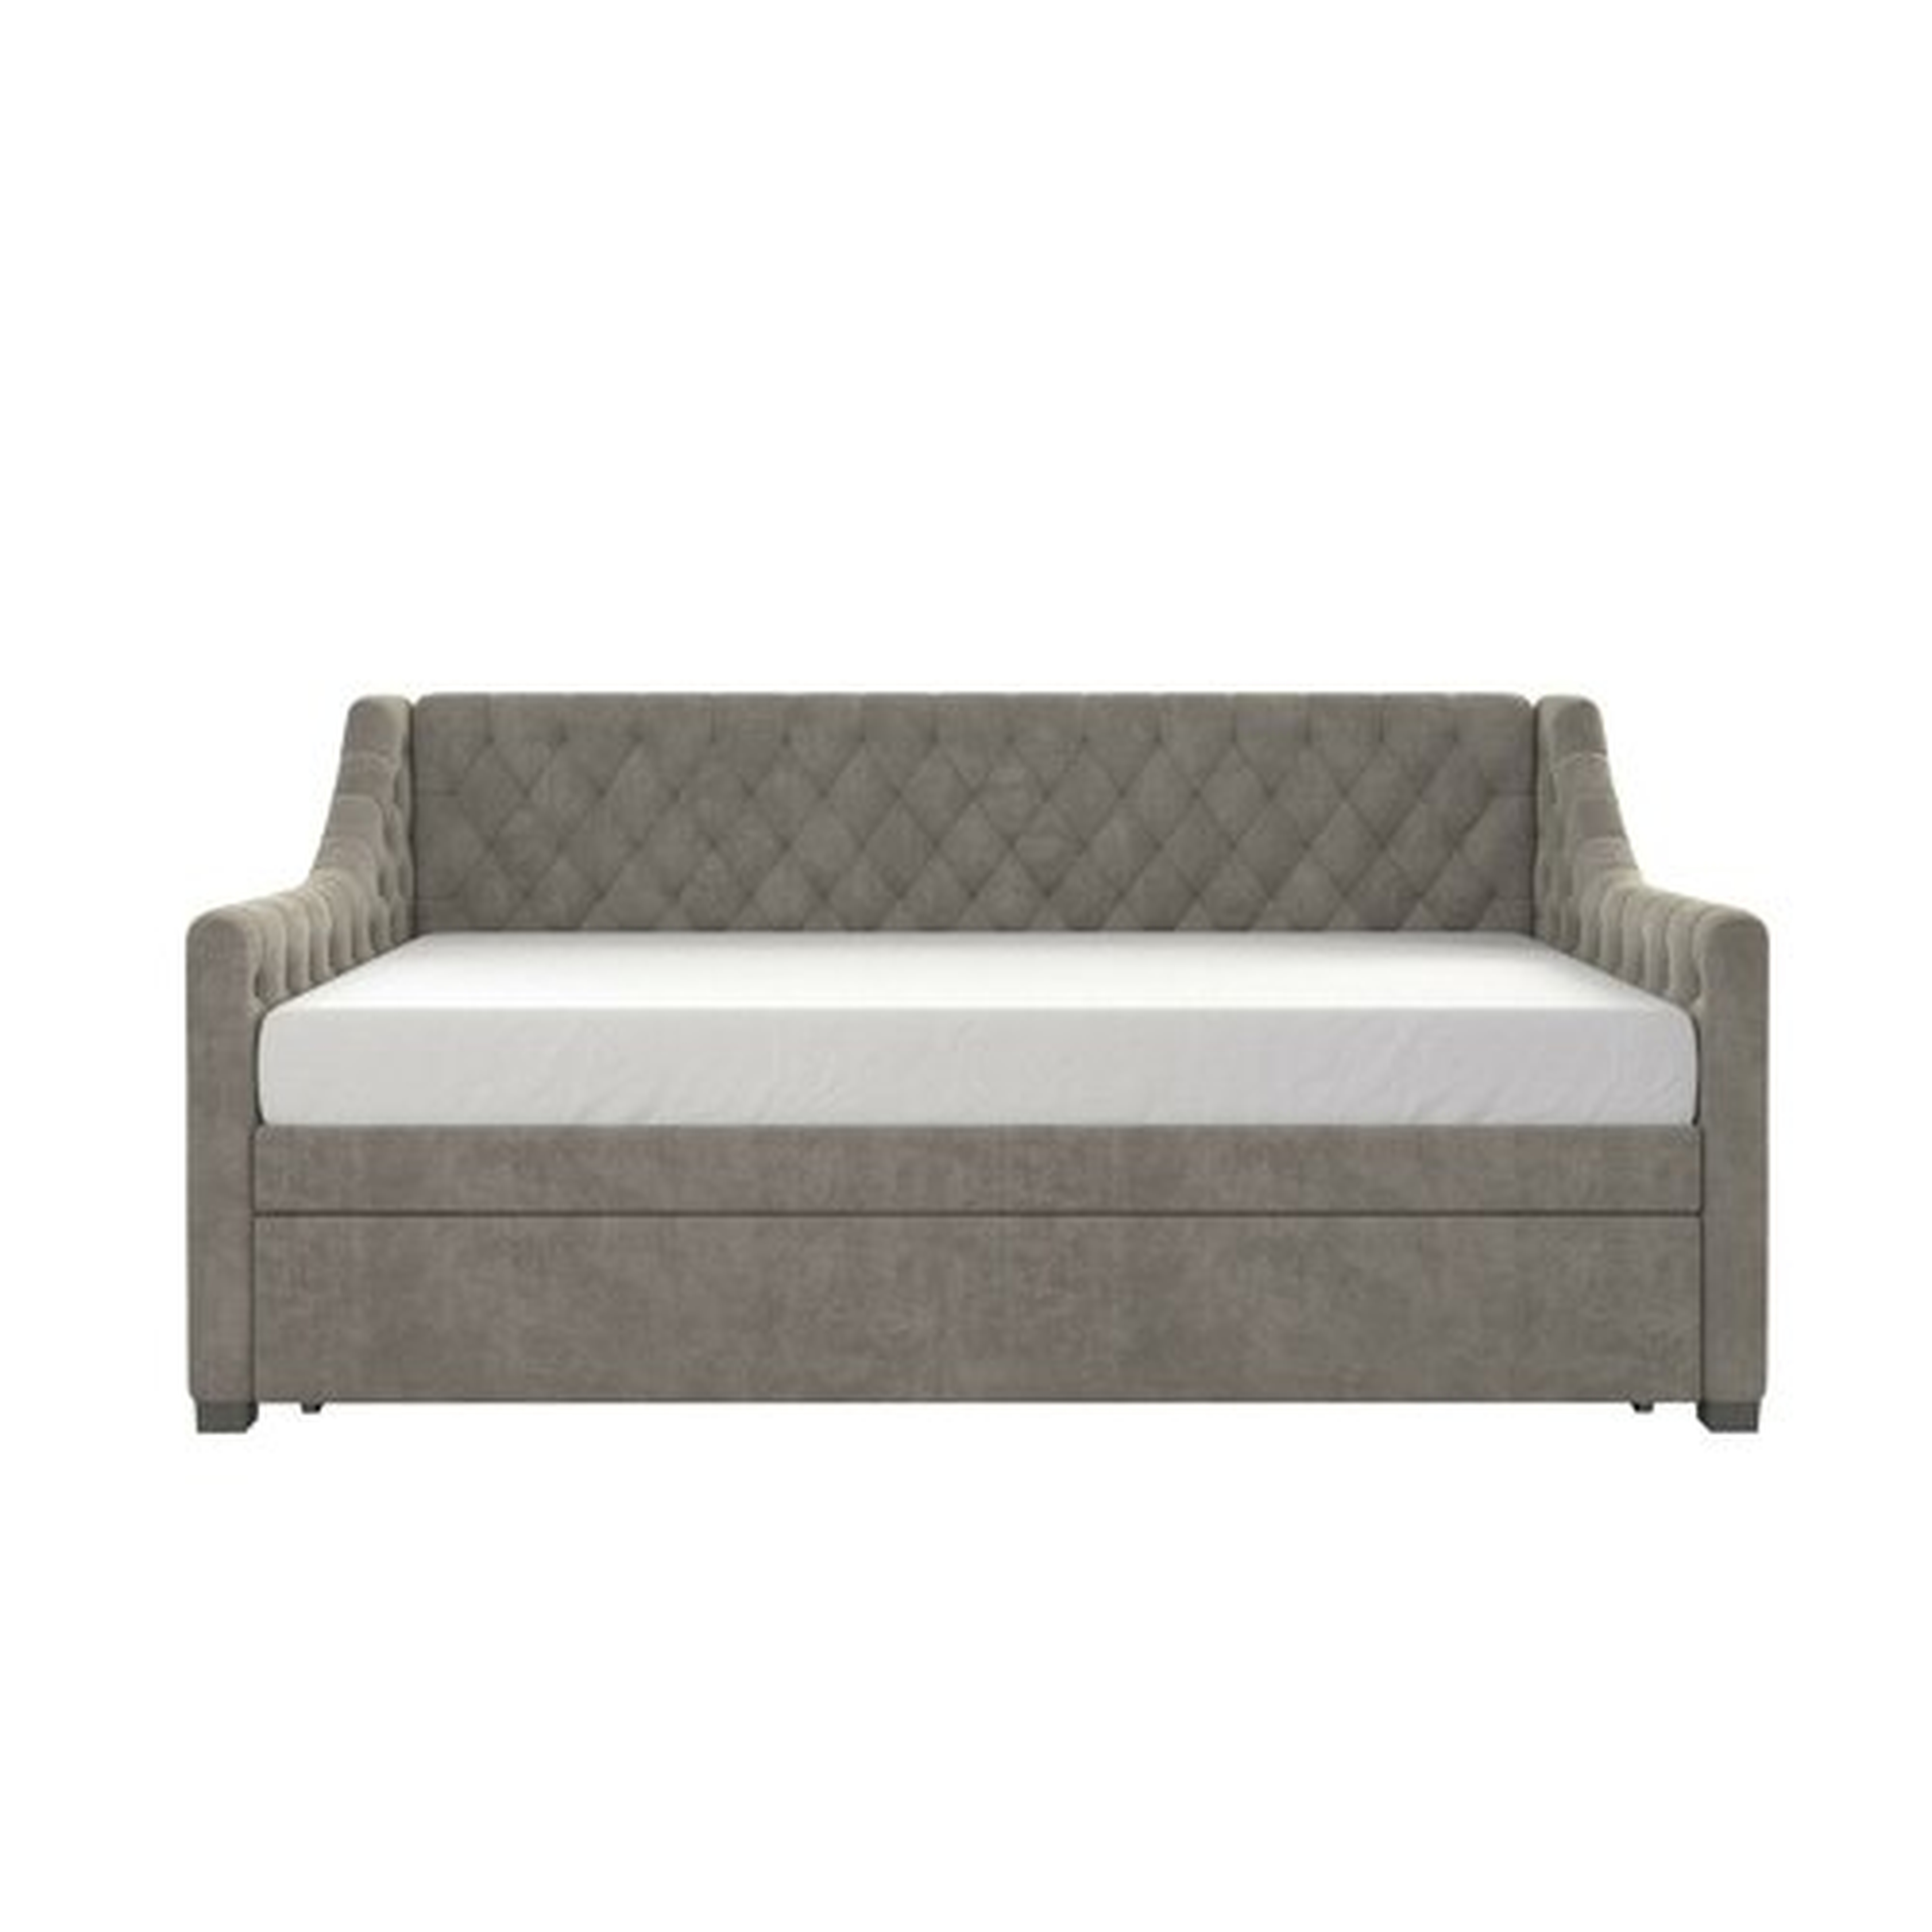 Monarch Hill Ambrosia Twin Daybed with Trundle - AllModern